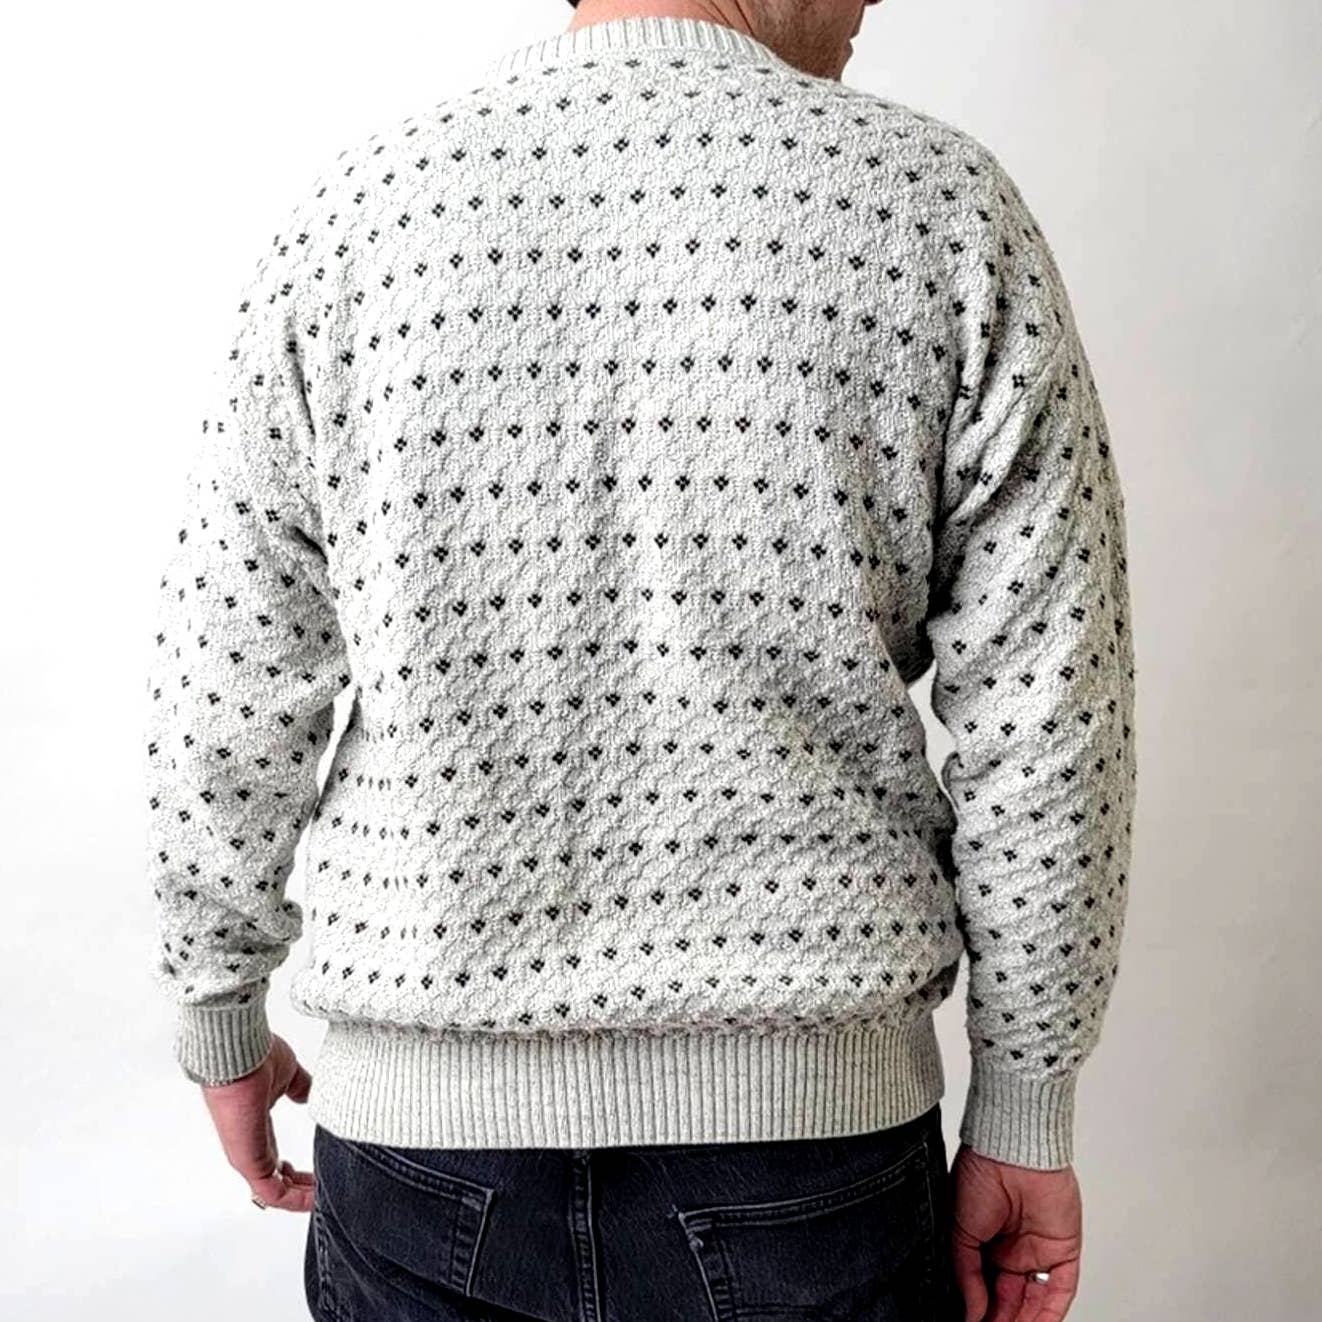 Vintage 90s Crew Neck Chunky Knit Grampa Sweater - L